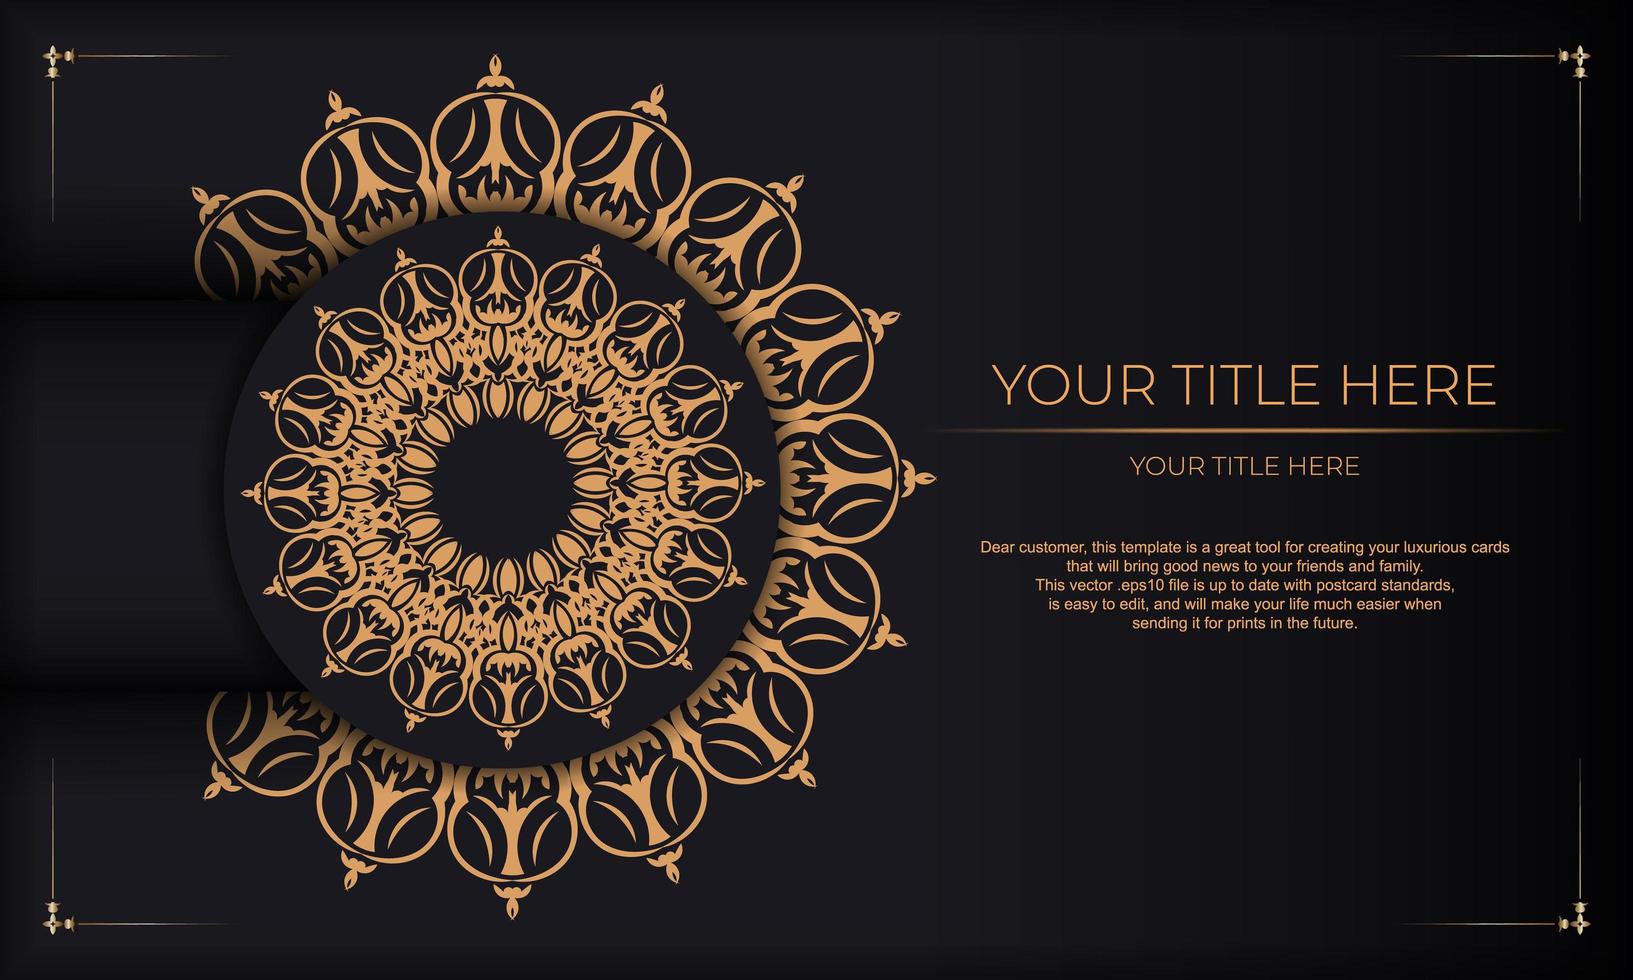 Black background with luxury vintage ornaments and place under the text. Print-ready invitation design with vintage ornaments. vector